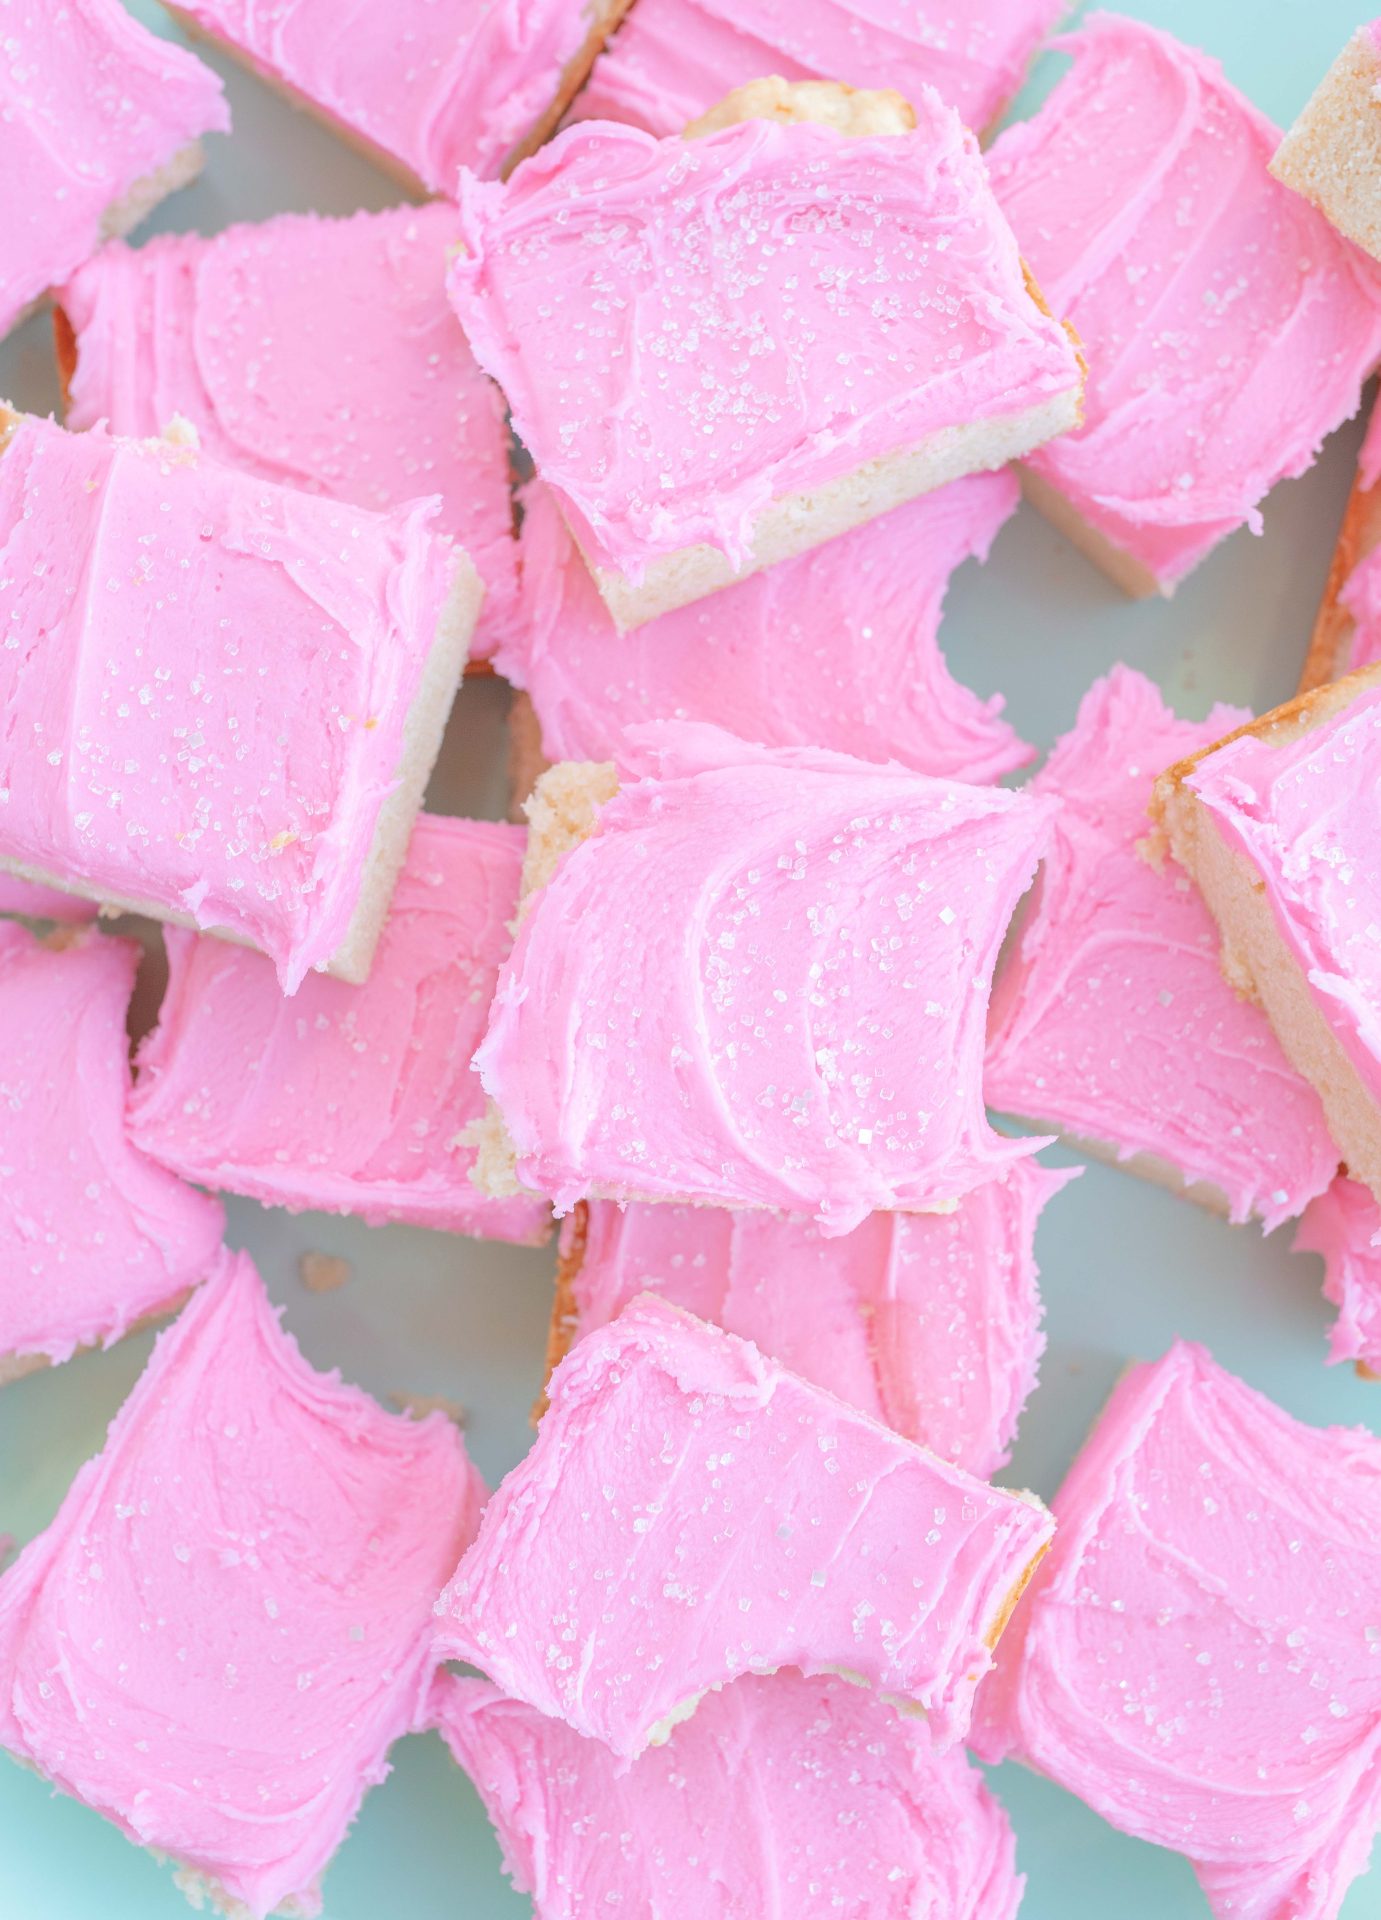 frosted sugar cookie bars, sugar cookies, pink frosting, pink frosted sugar cookies, almond sugar cookies, almond extract, holiday, baking, pretty food, pink valentines day bars, spring sugar cookie bars, delicious recipe, the best sugar cookie bars, how to make sugar cookie bars, dessert, valentines day treats, easter, spring, pretty food, simply taralynn recipes, baking